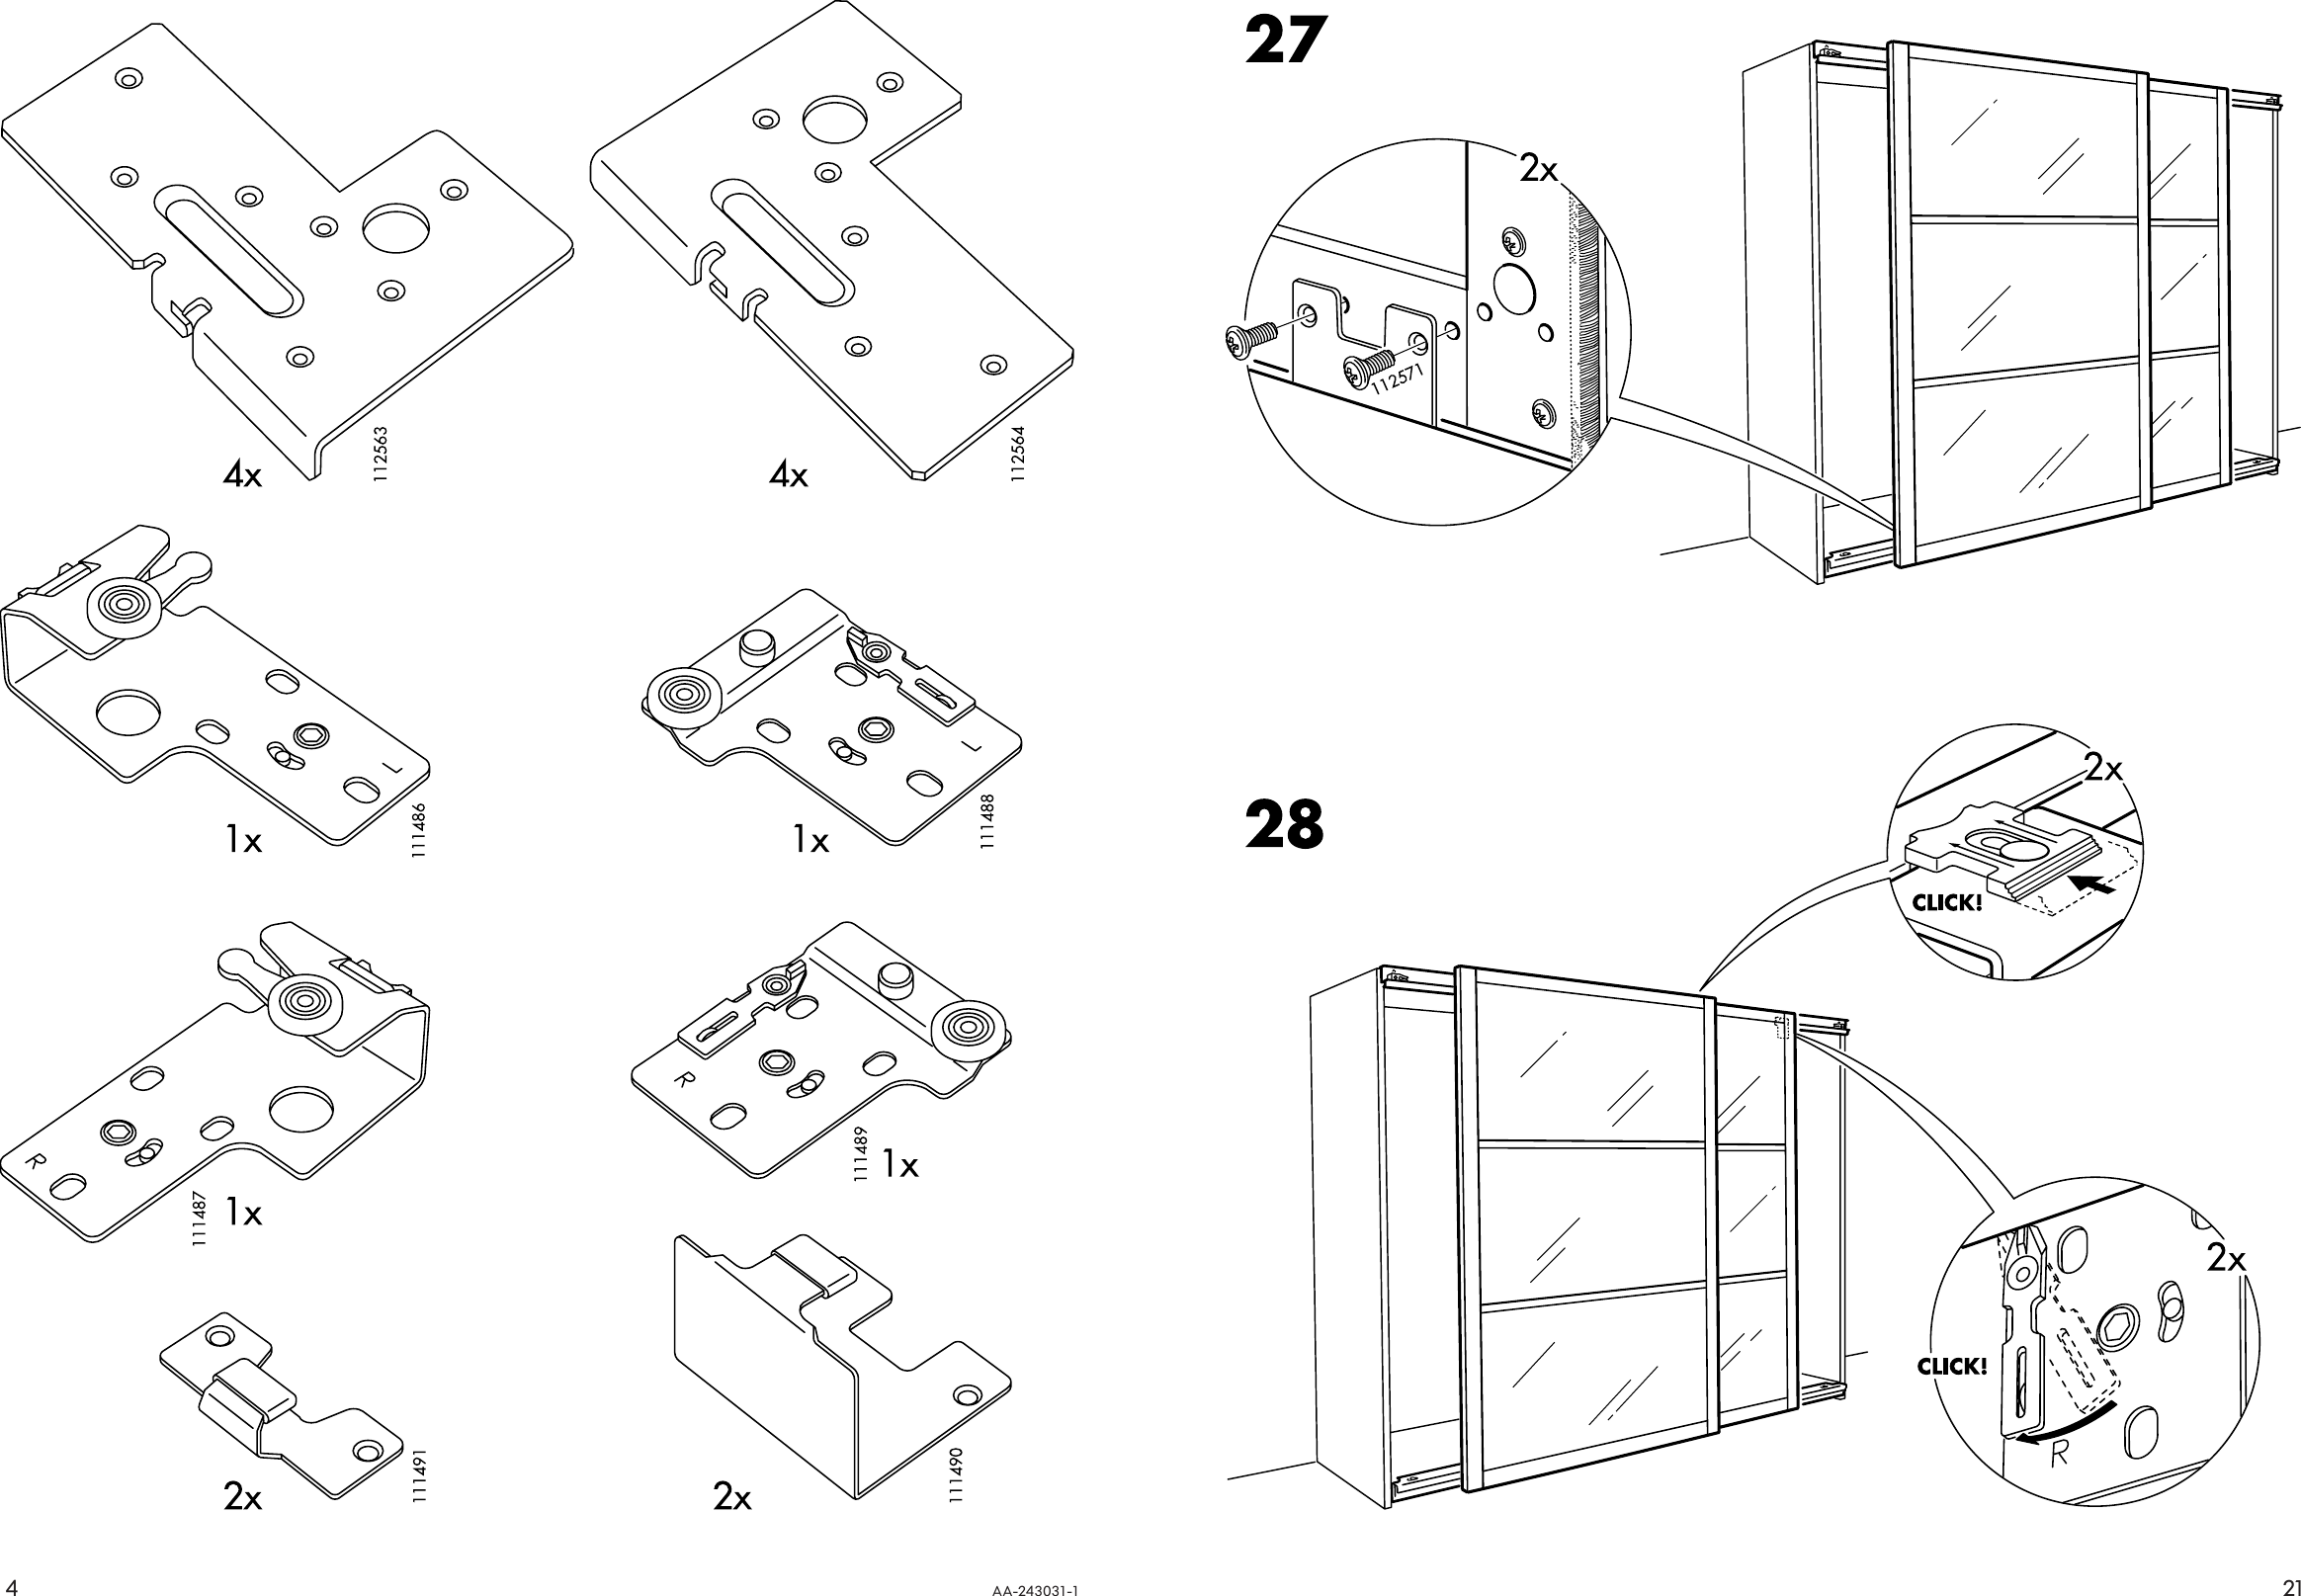 Page 4 of 12 - Ikea Ikea-Pax-Stordal-Sliding-Door-Pair-98X93-Assembly-Instruction